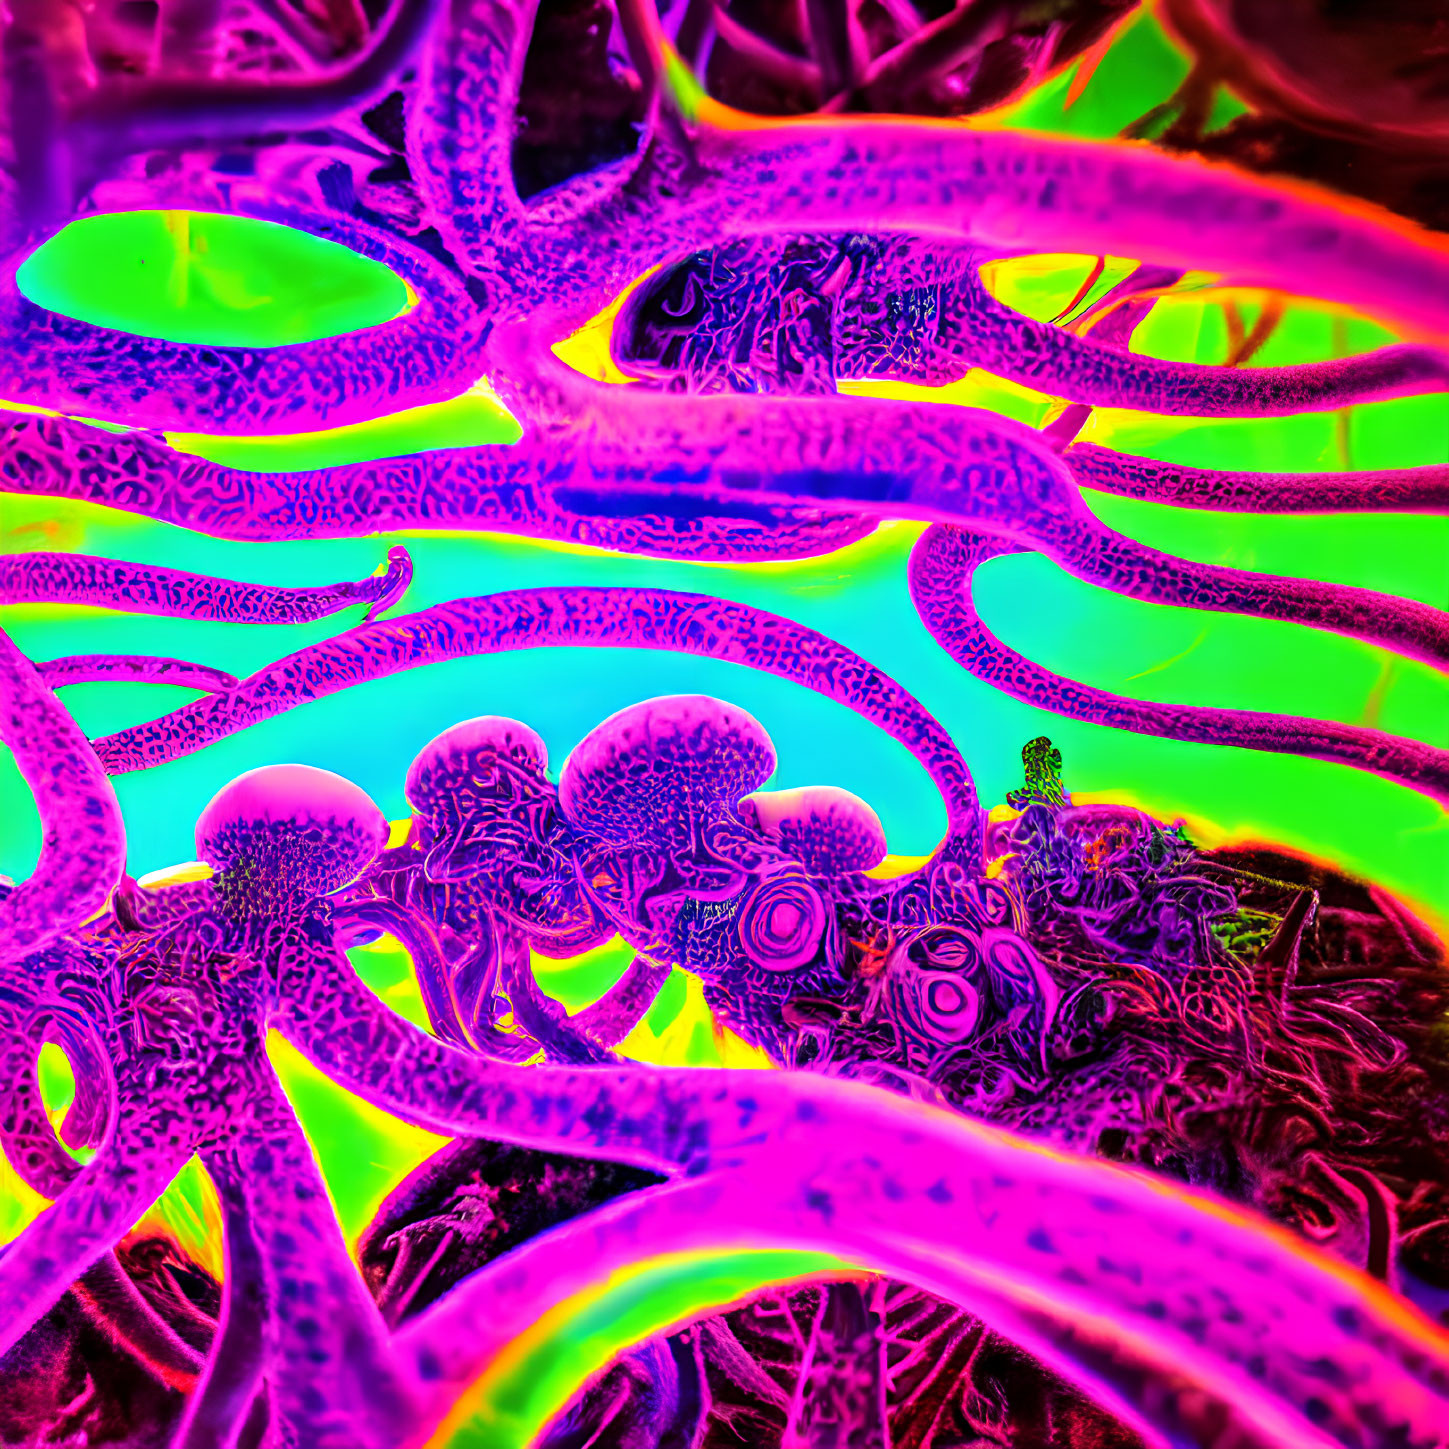 Psychedelic neon colors in intricate tentacle-like pattern